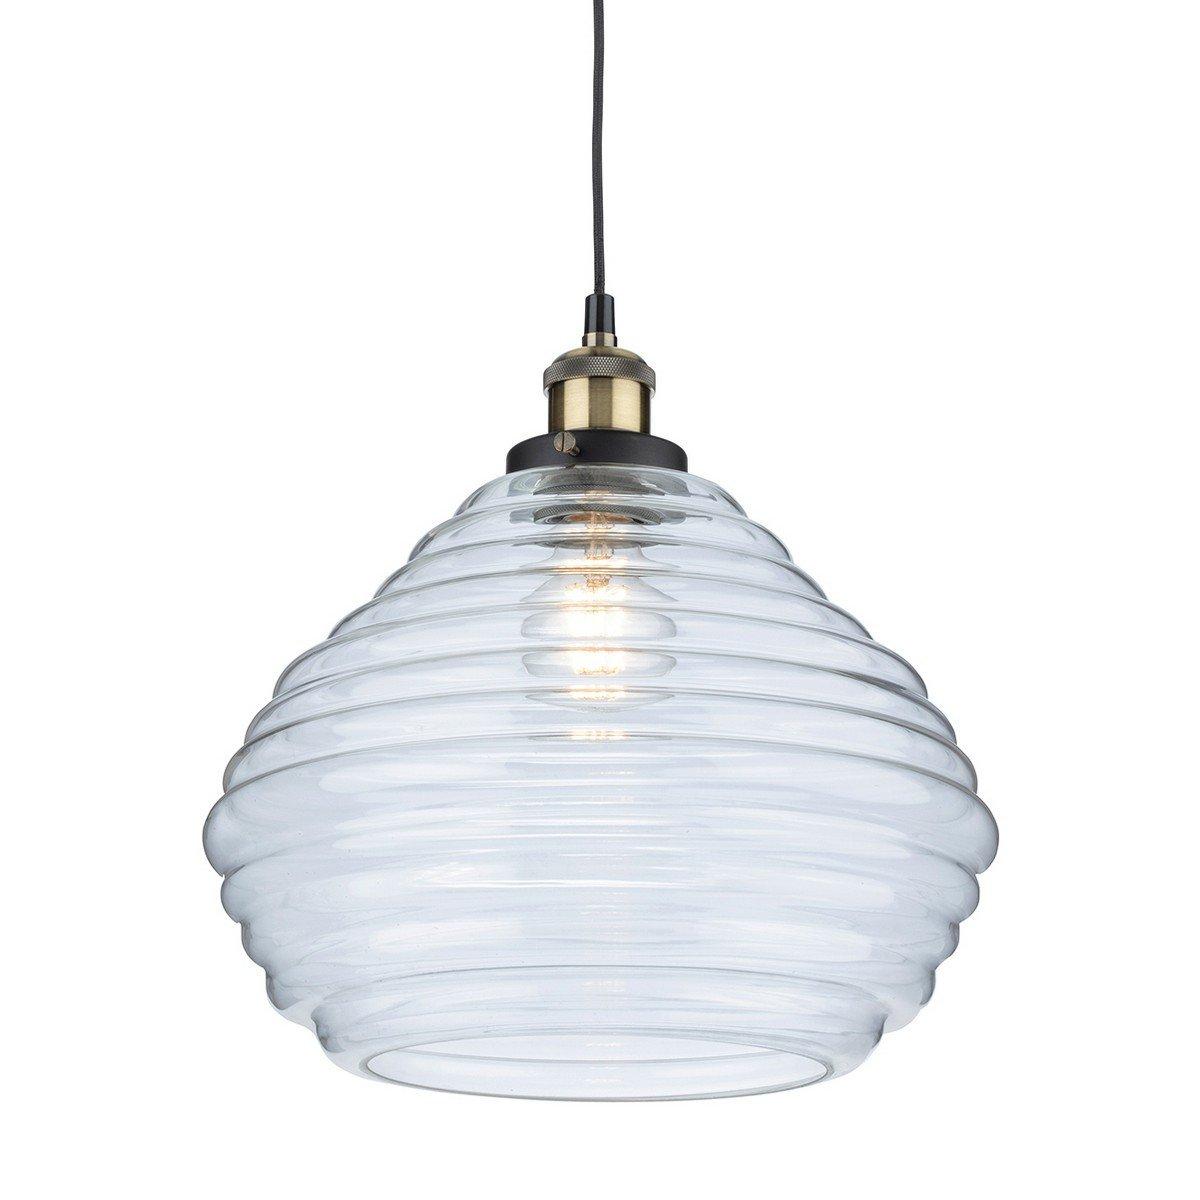 Orla Dome Pendant Light Antique Brass with Clear Glass